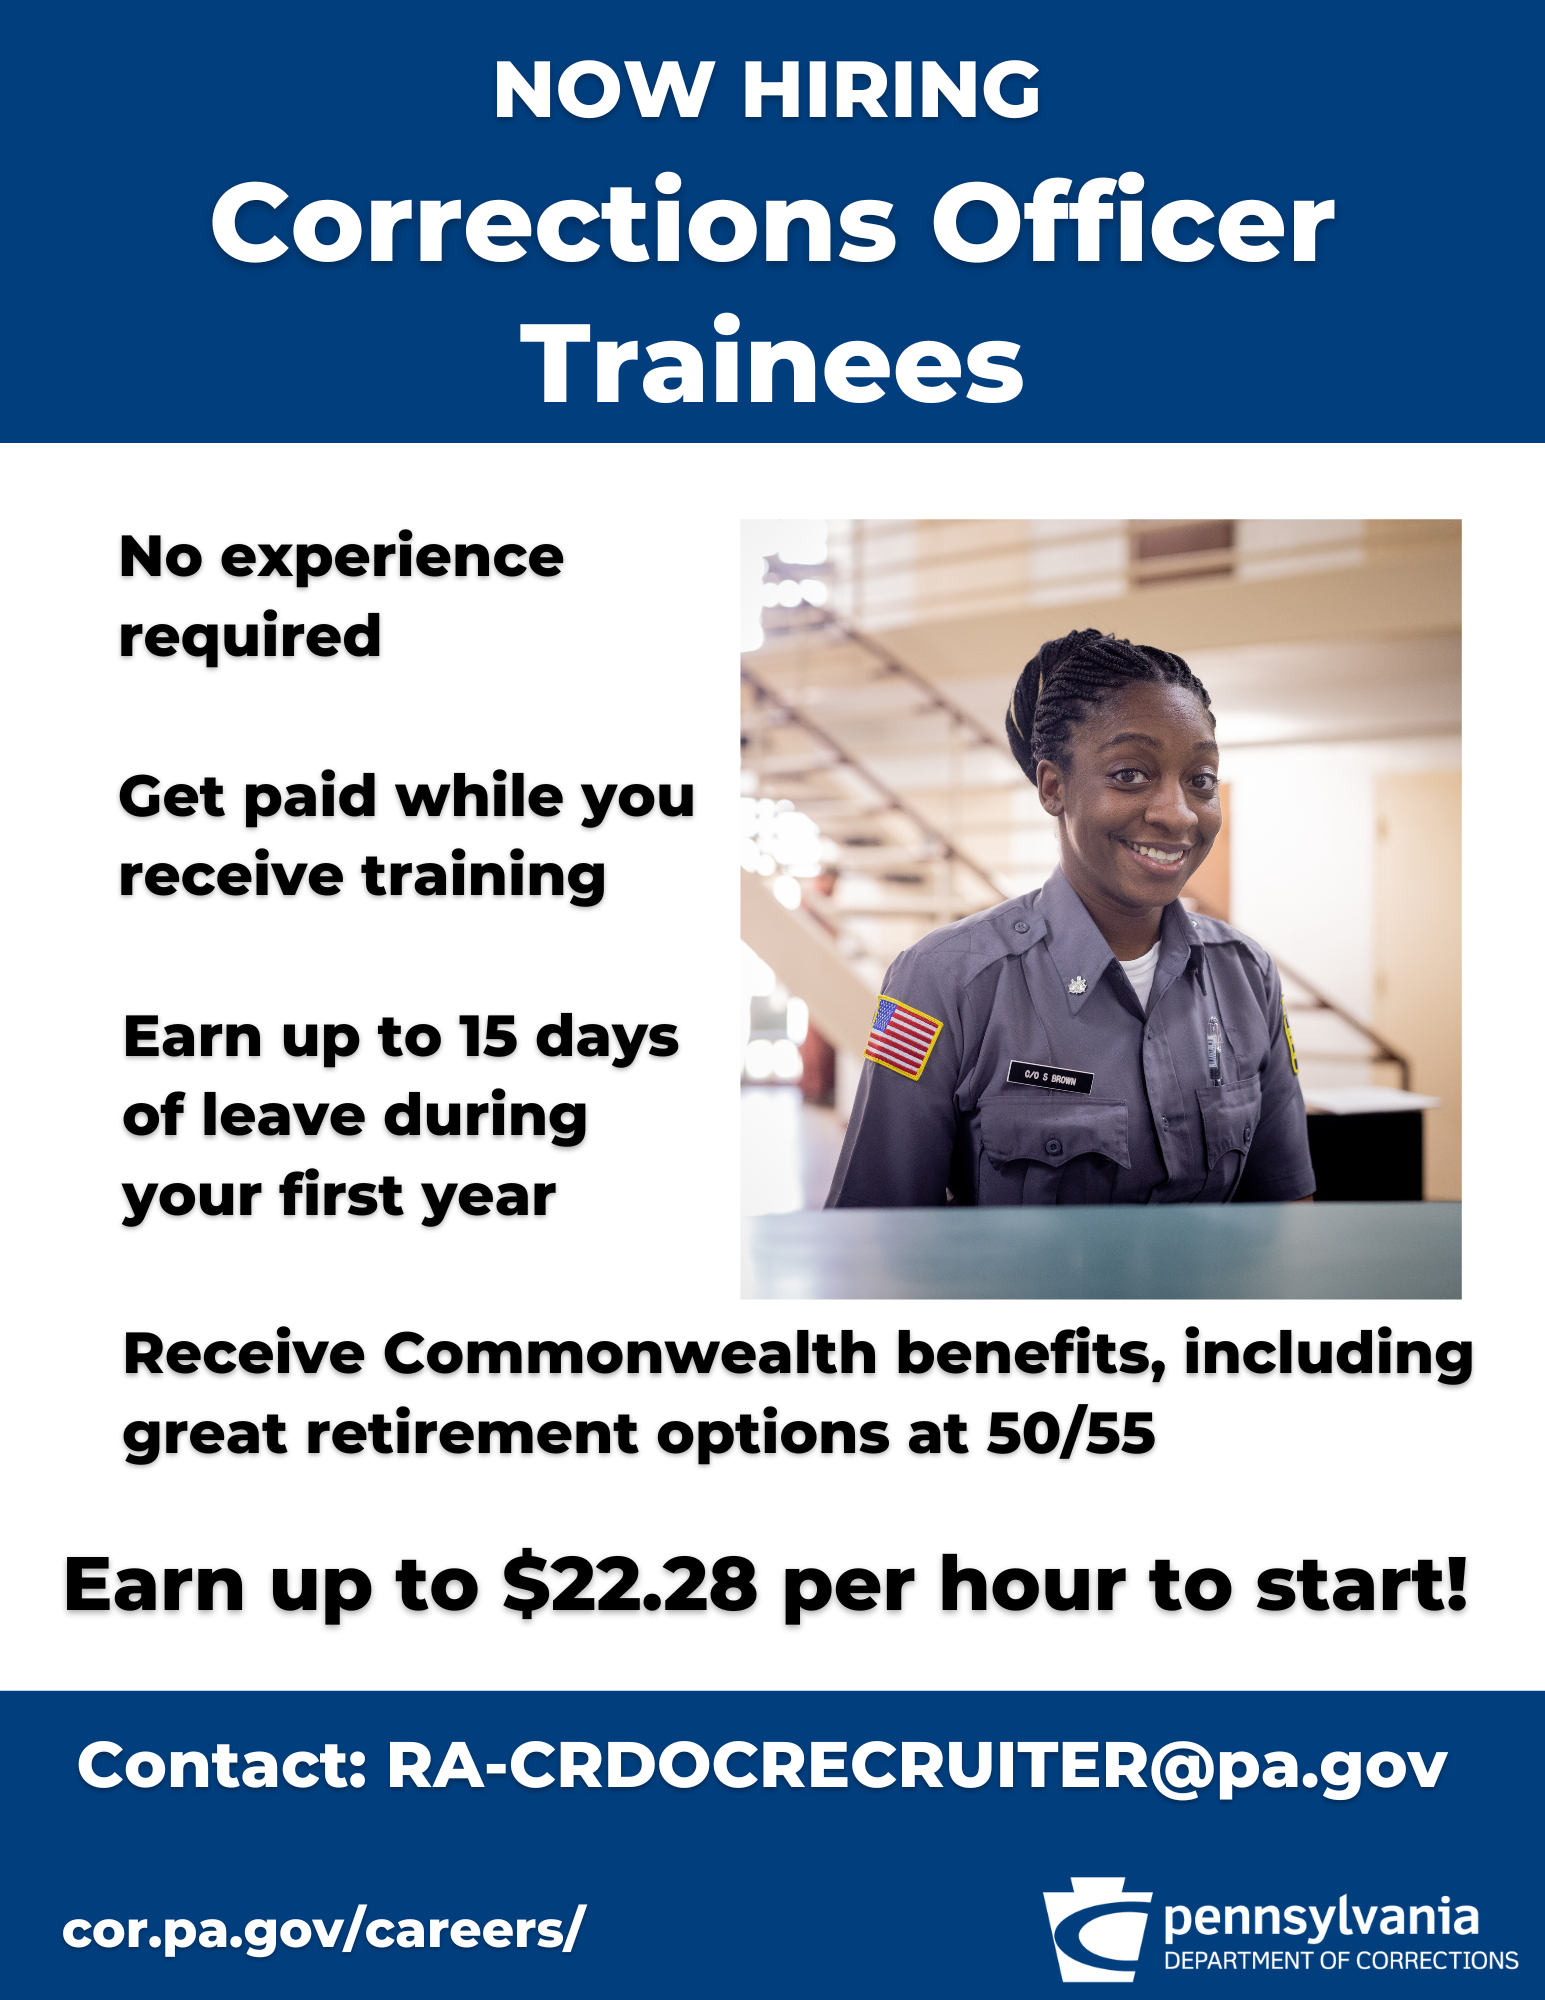 A flyer promoting corrections officer trainee positions